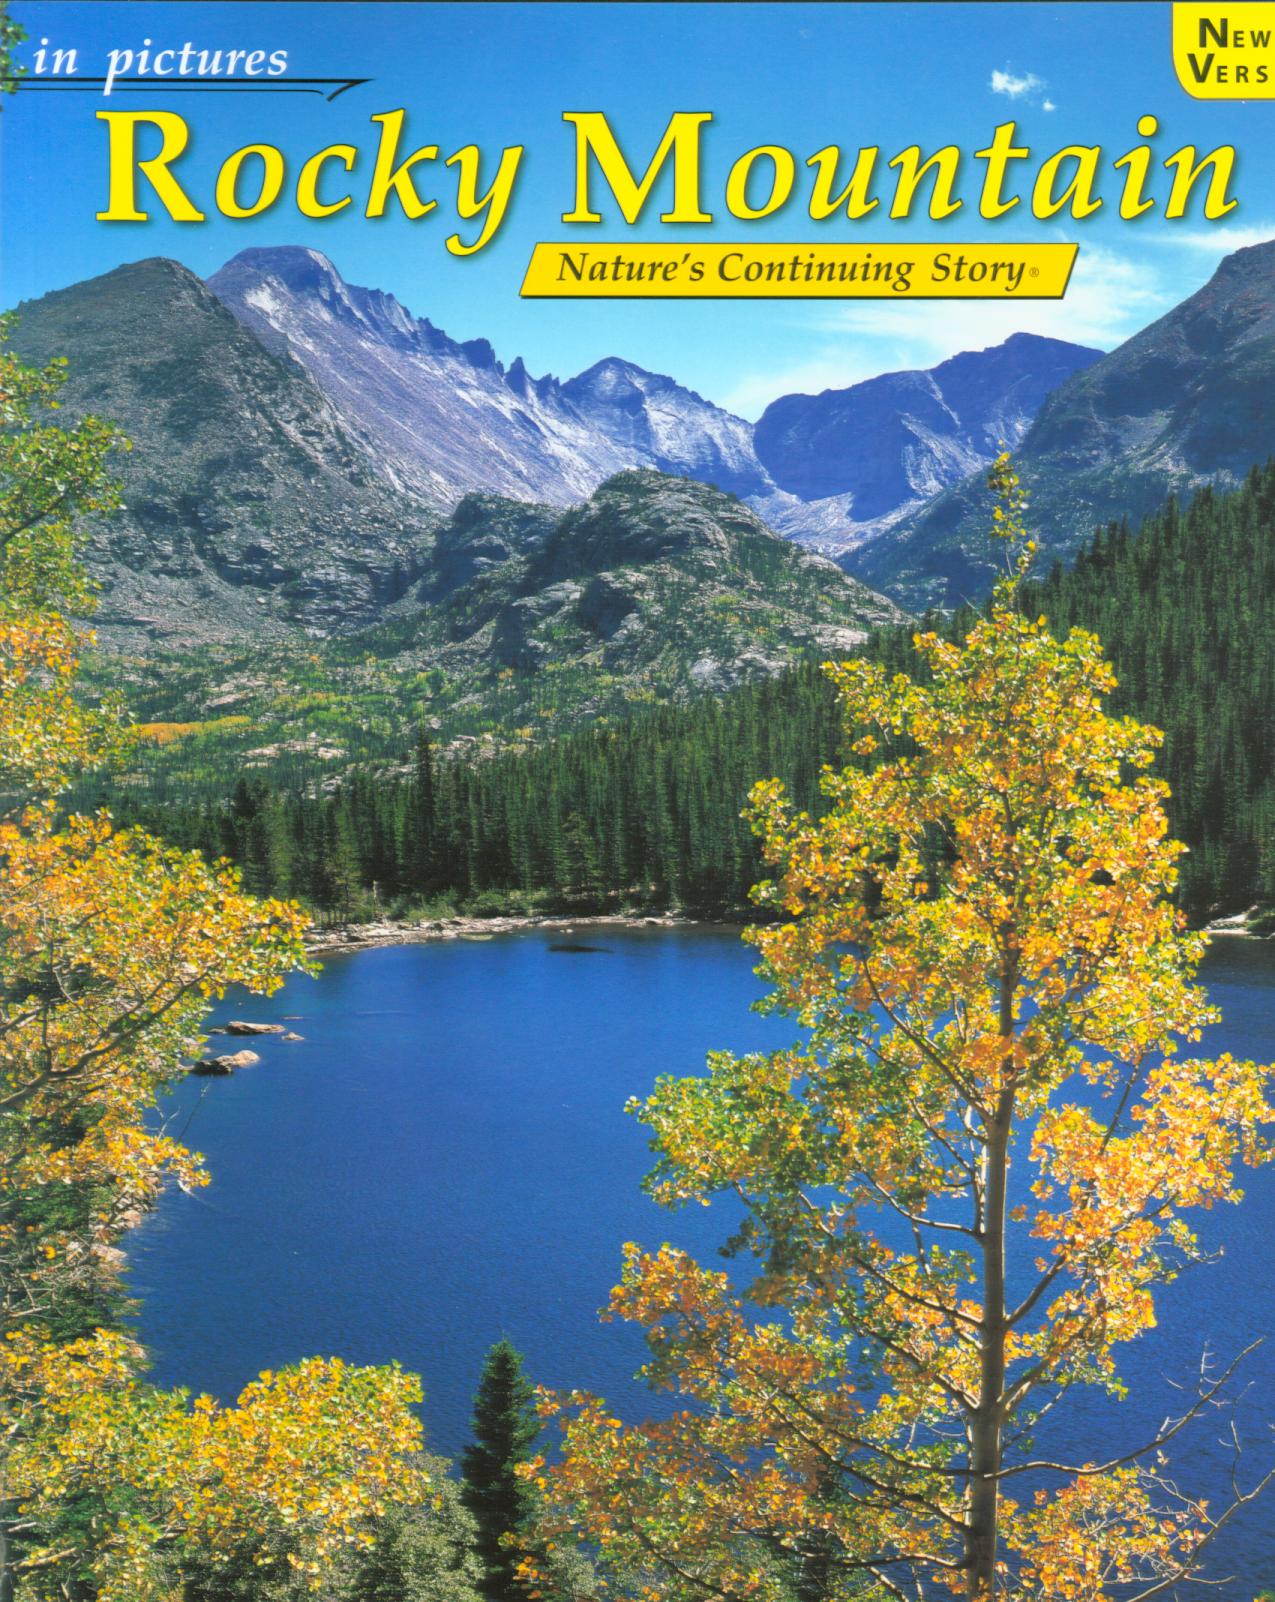 ROCKY MOUNTAIN IN PICTURES: nature's continuing story. 